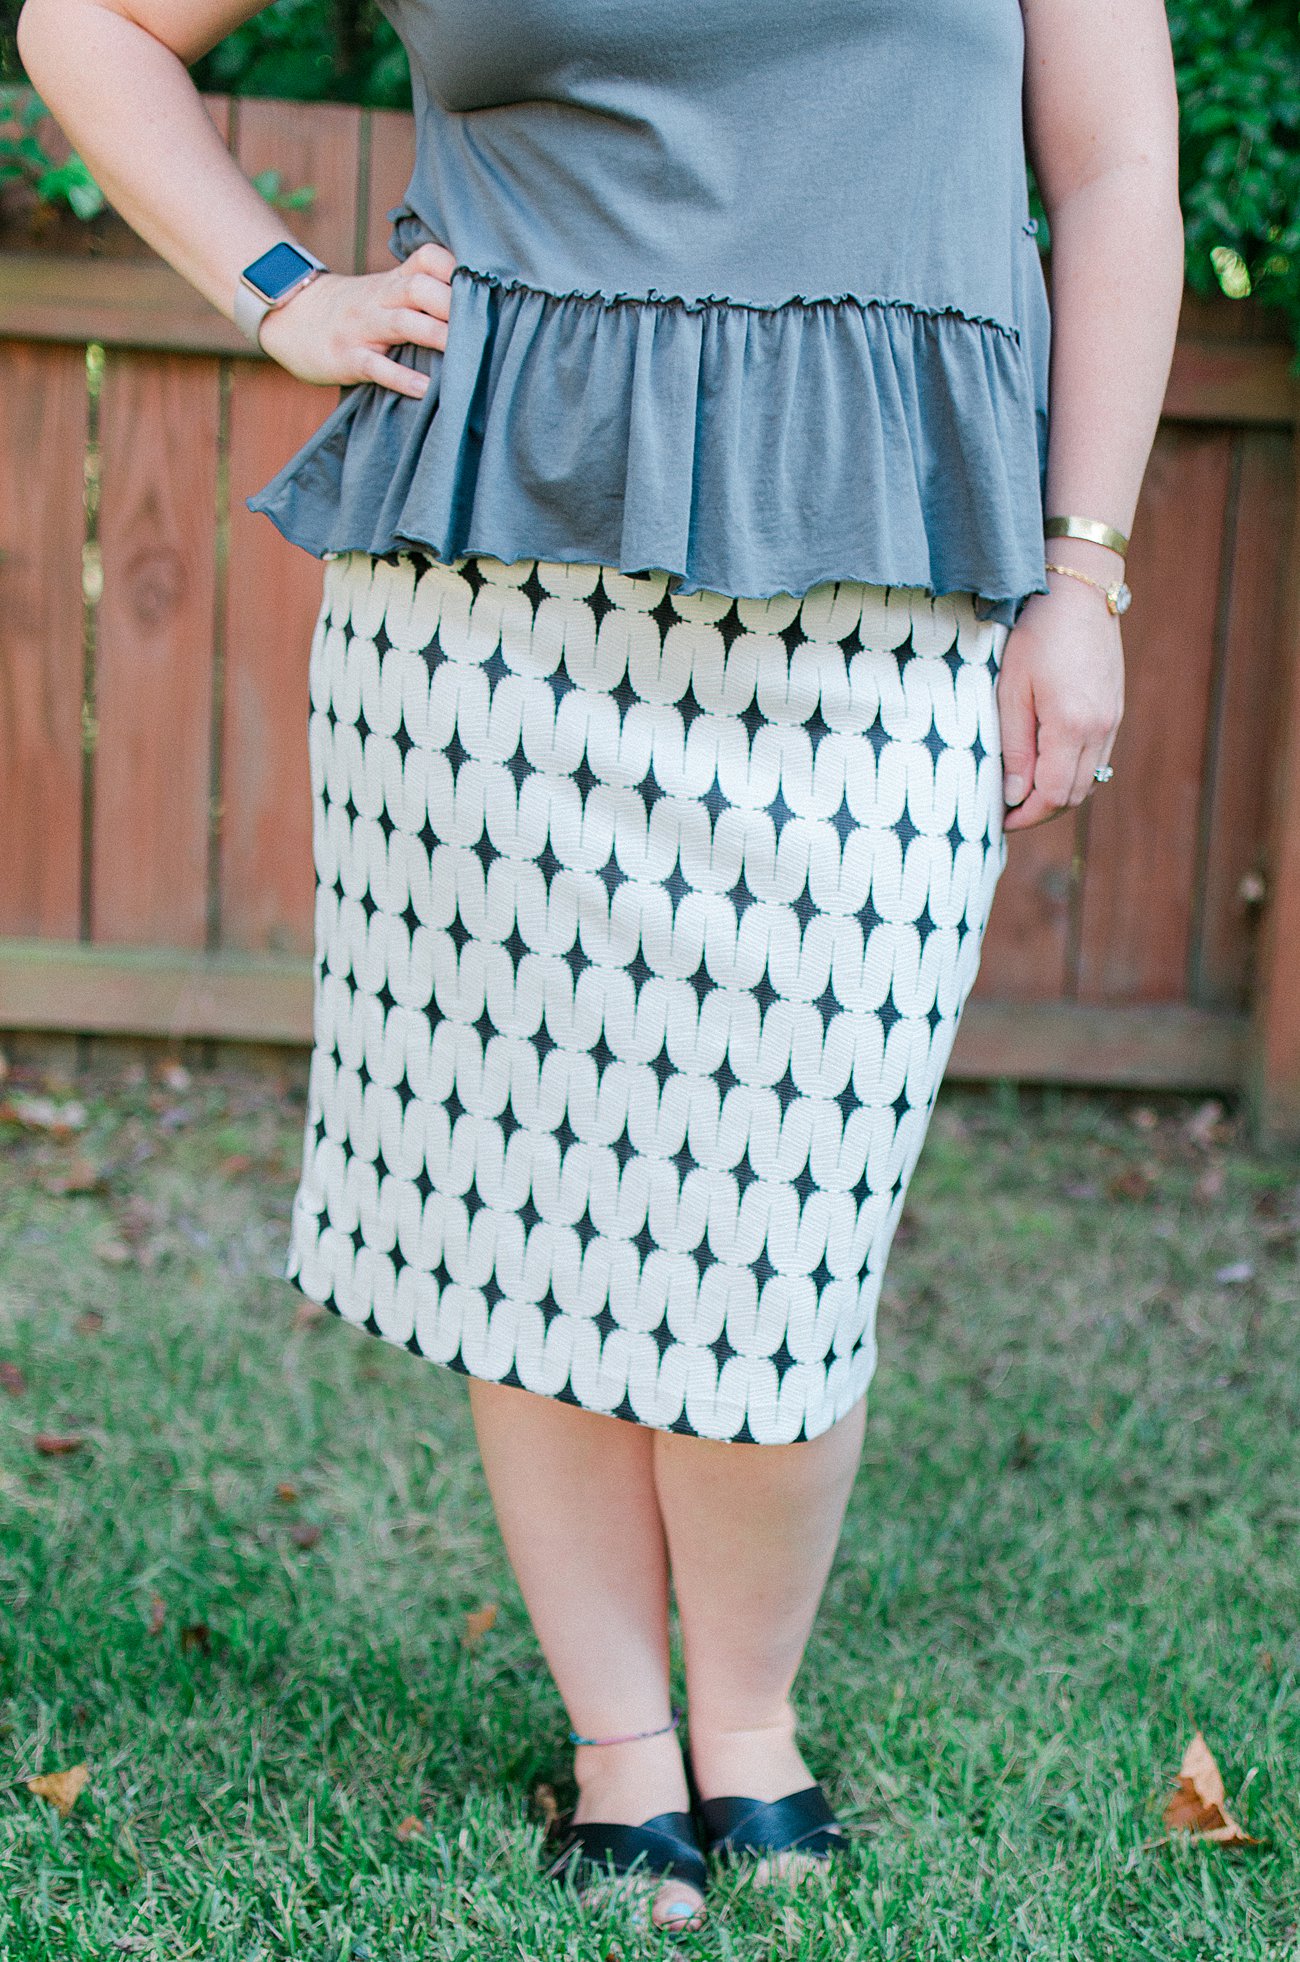 Stitch Fix Renee C - "Leena Printed Skirt" - Size XL - $54 (Made in the USA) - Stitch Fix Review #46 by NC fashion blogger Still Being Molly